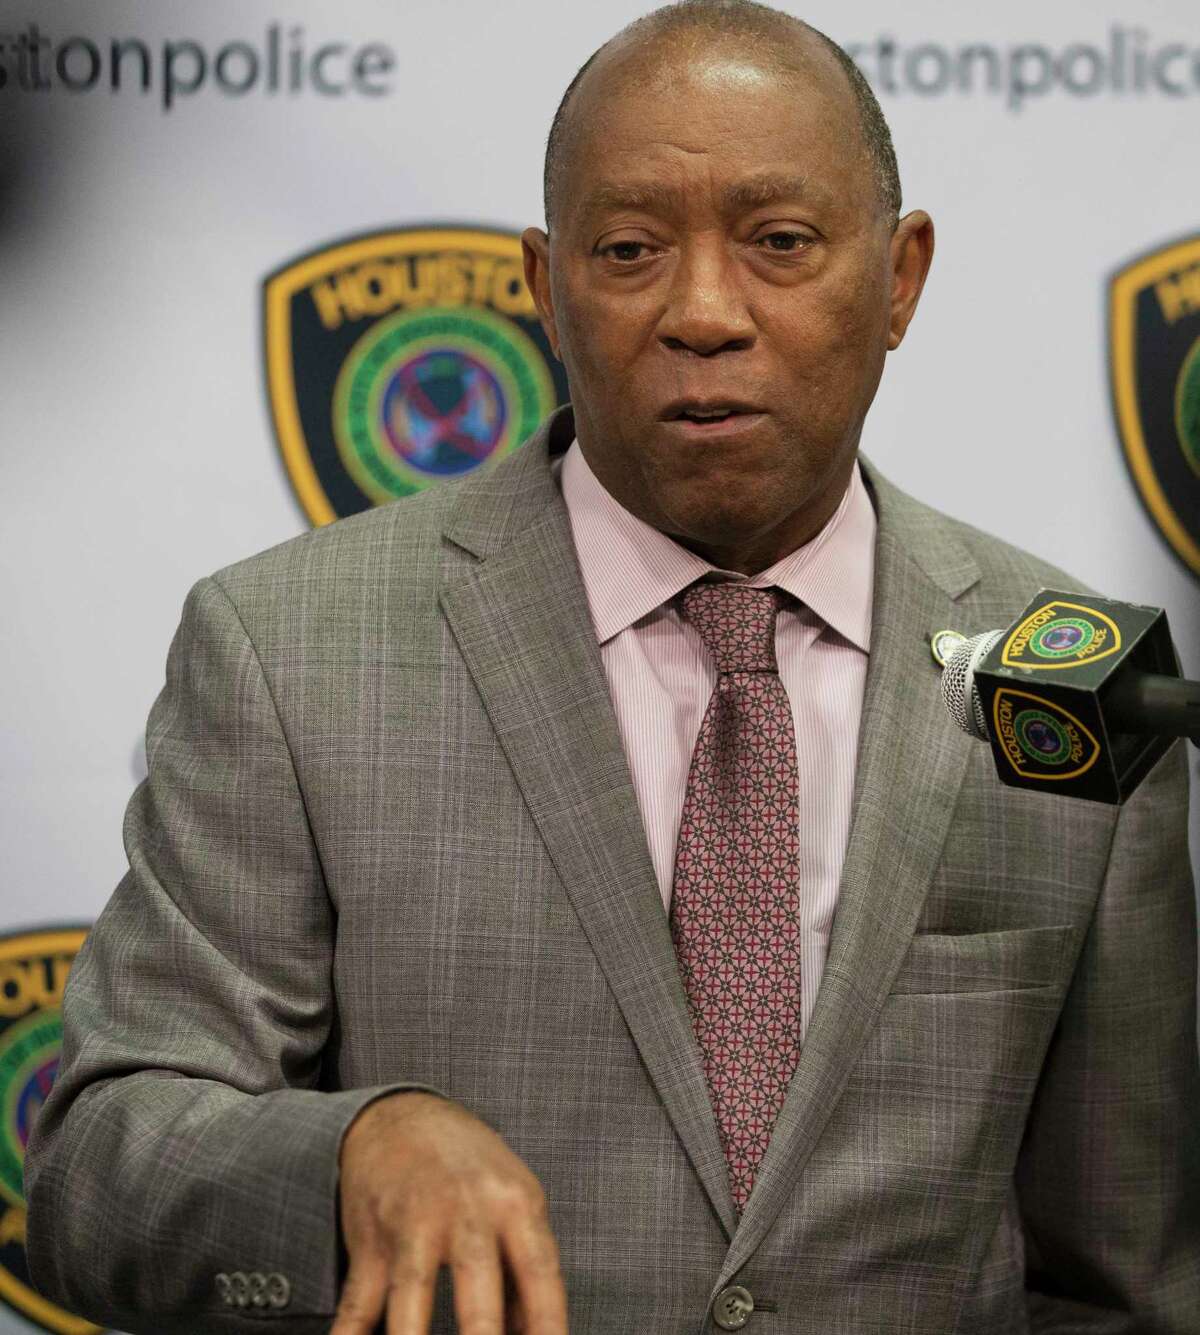 Houston Mayor Sylvester Turner joins Houston Police Department Executive Assistant Chief Troy Finner, not in photograph, to give updates on Maleah Davis' case during a press conference on Friday, May 31, 2019, in Houston. Officials said they believe the remains of a child found in a black garbage bag on an Arkansas roadside could be the missing 4-year-old.